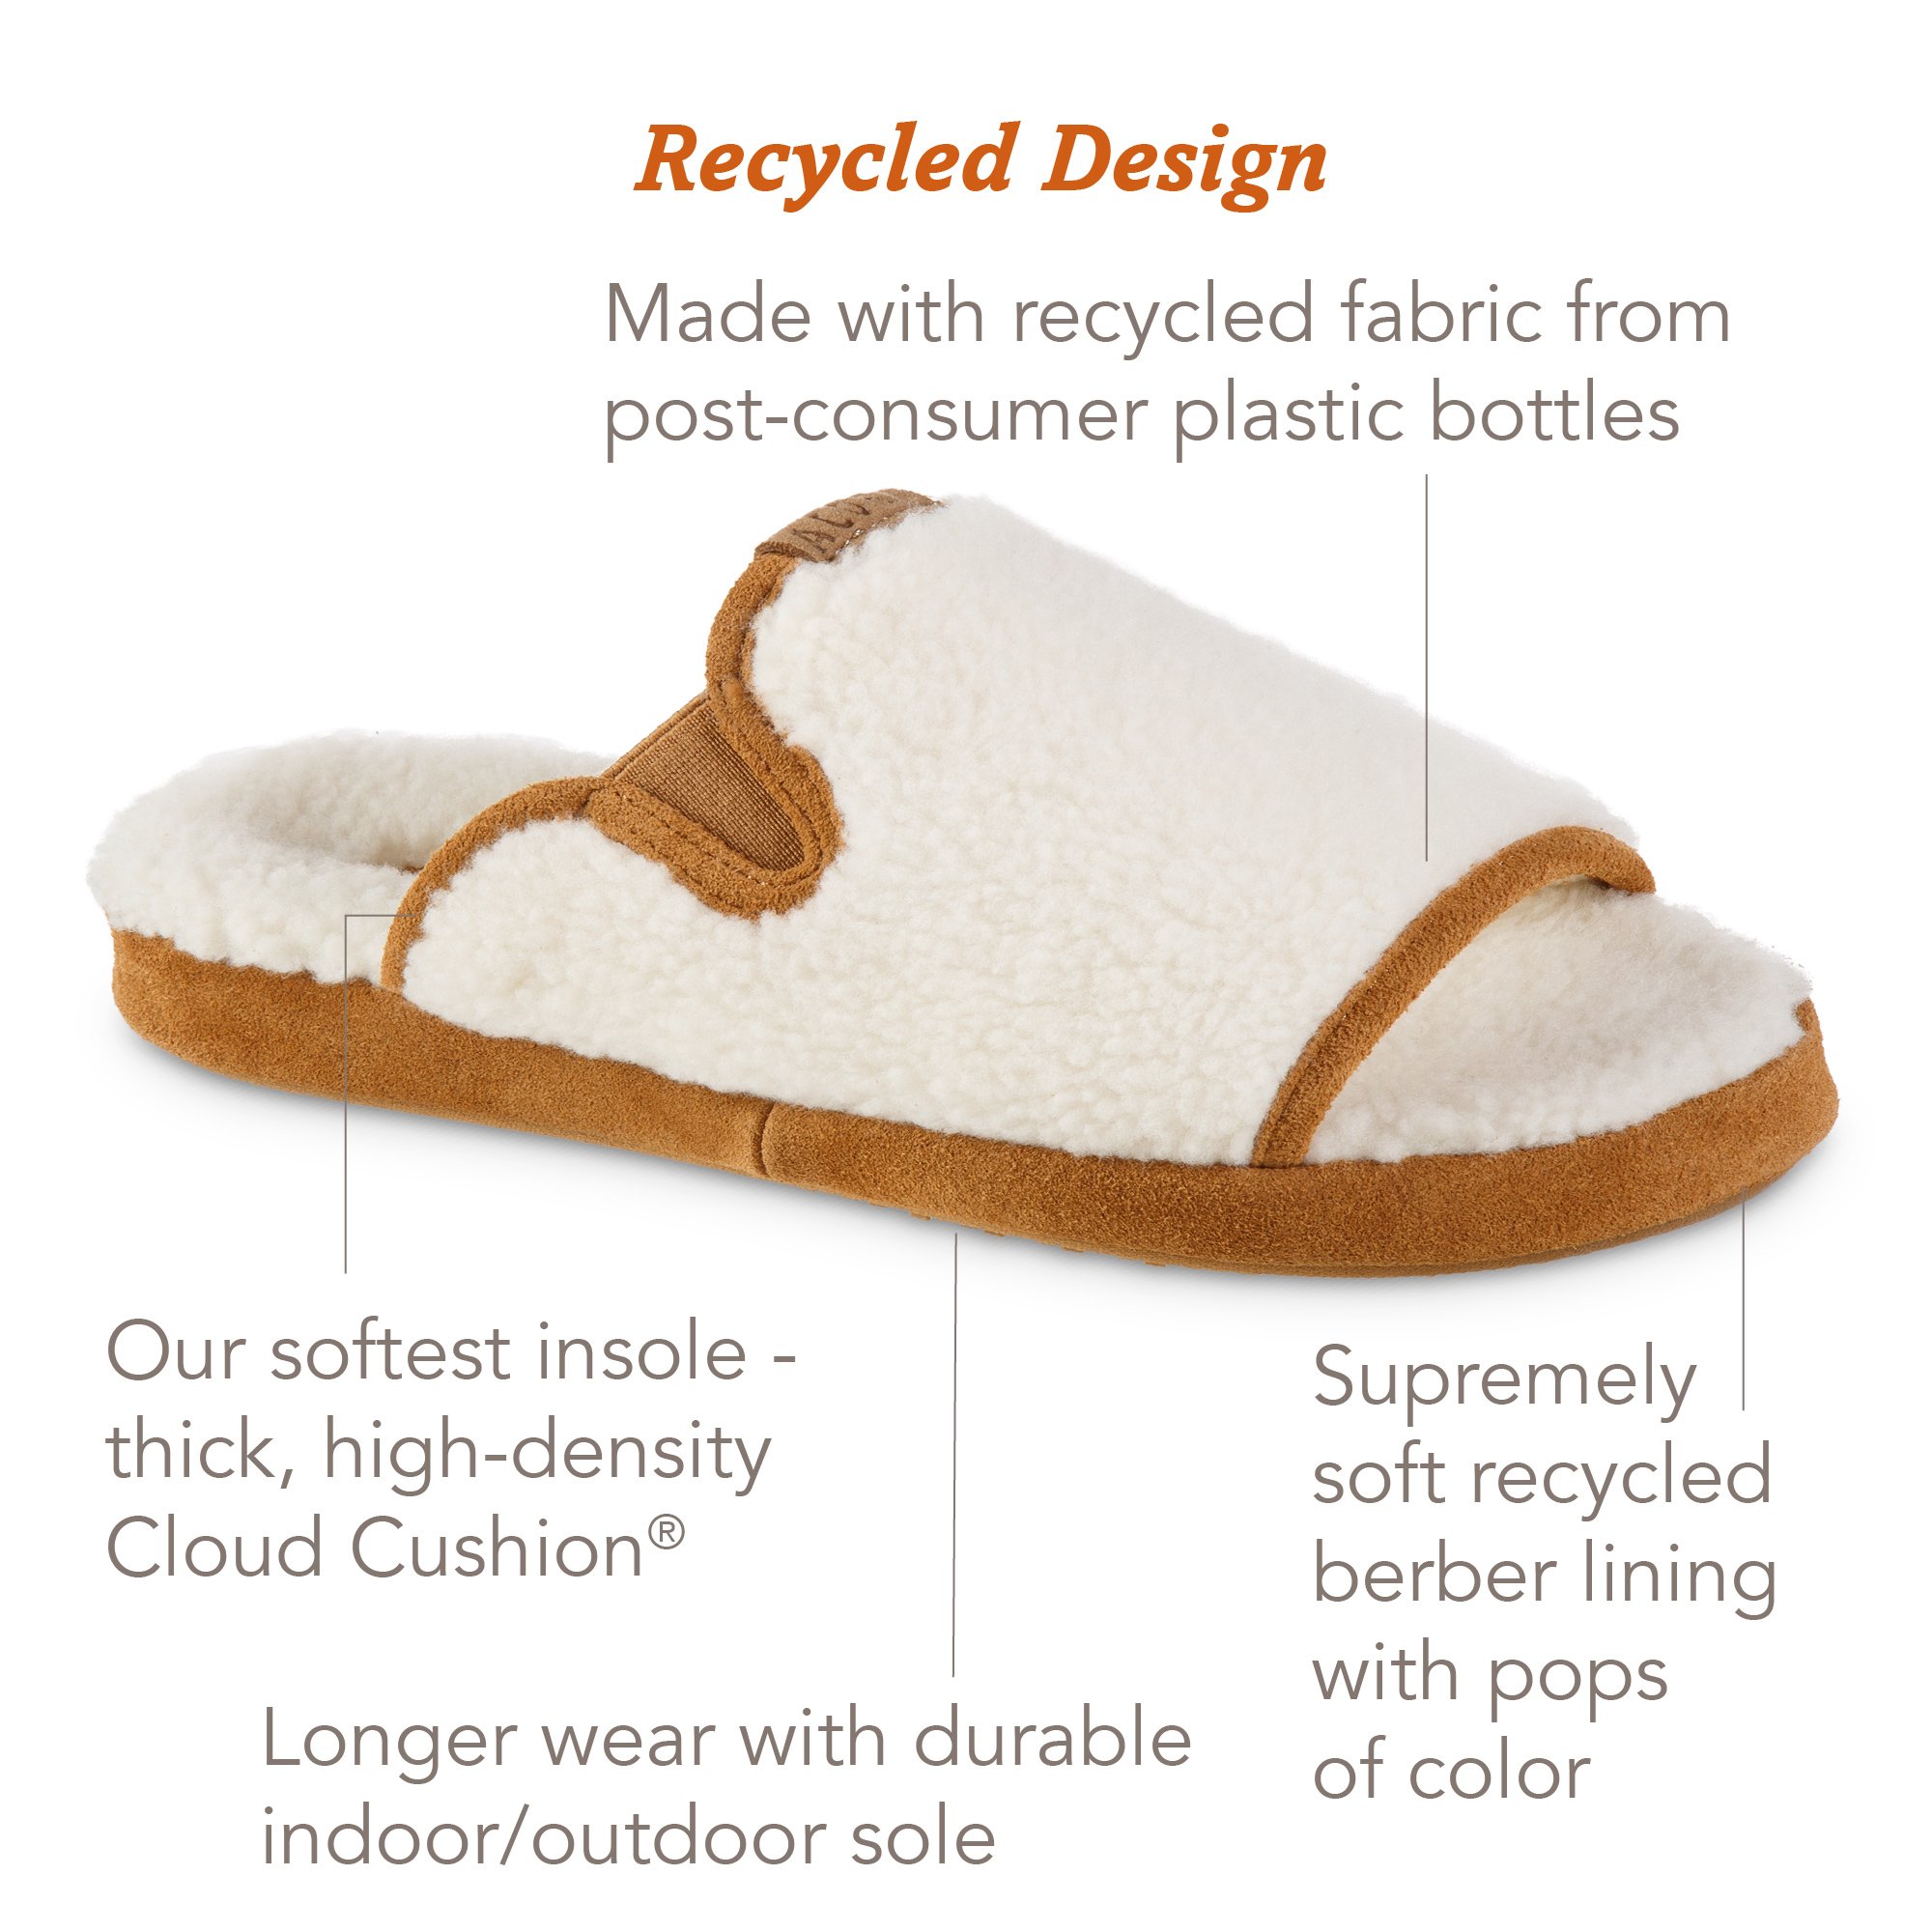 Women's Recycled Harbor Slide with Cloud Cushion® Comfort. – Acorn